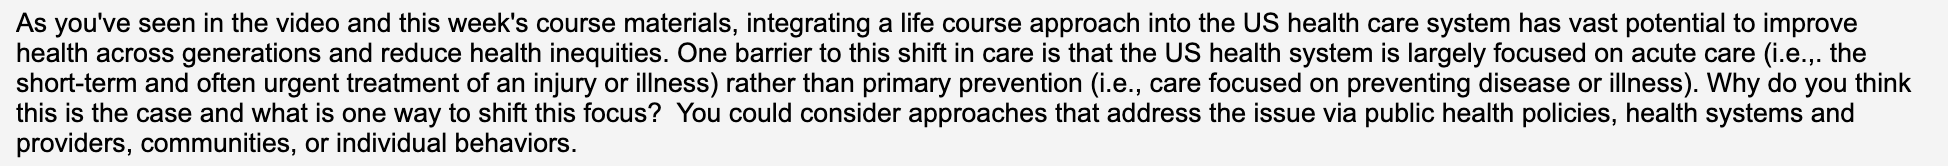 As You Ve Seen In The Video And This Week S Course Materials Integrating A Life Course Approach Into The Us Health Care 1